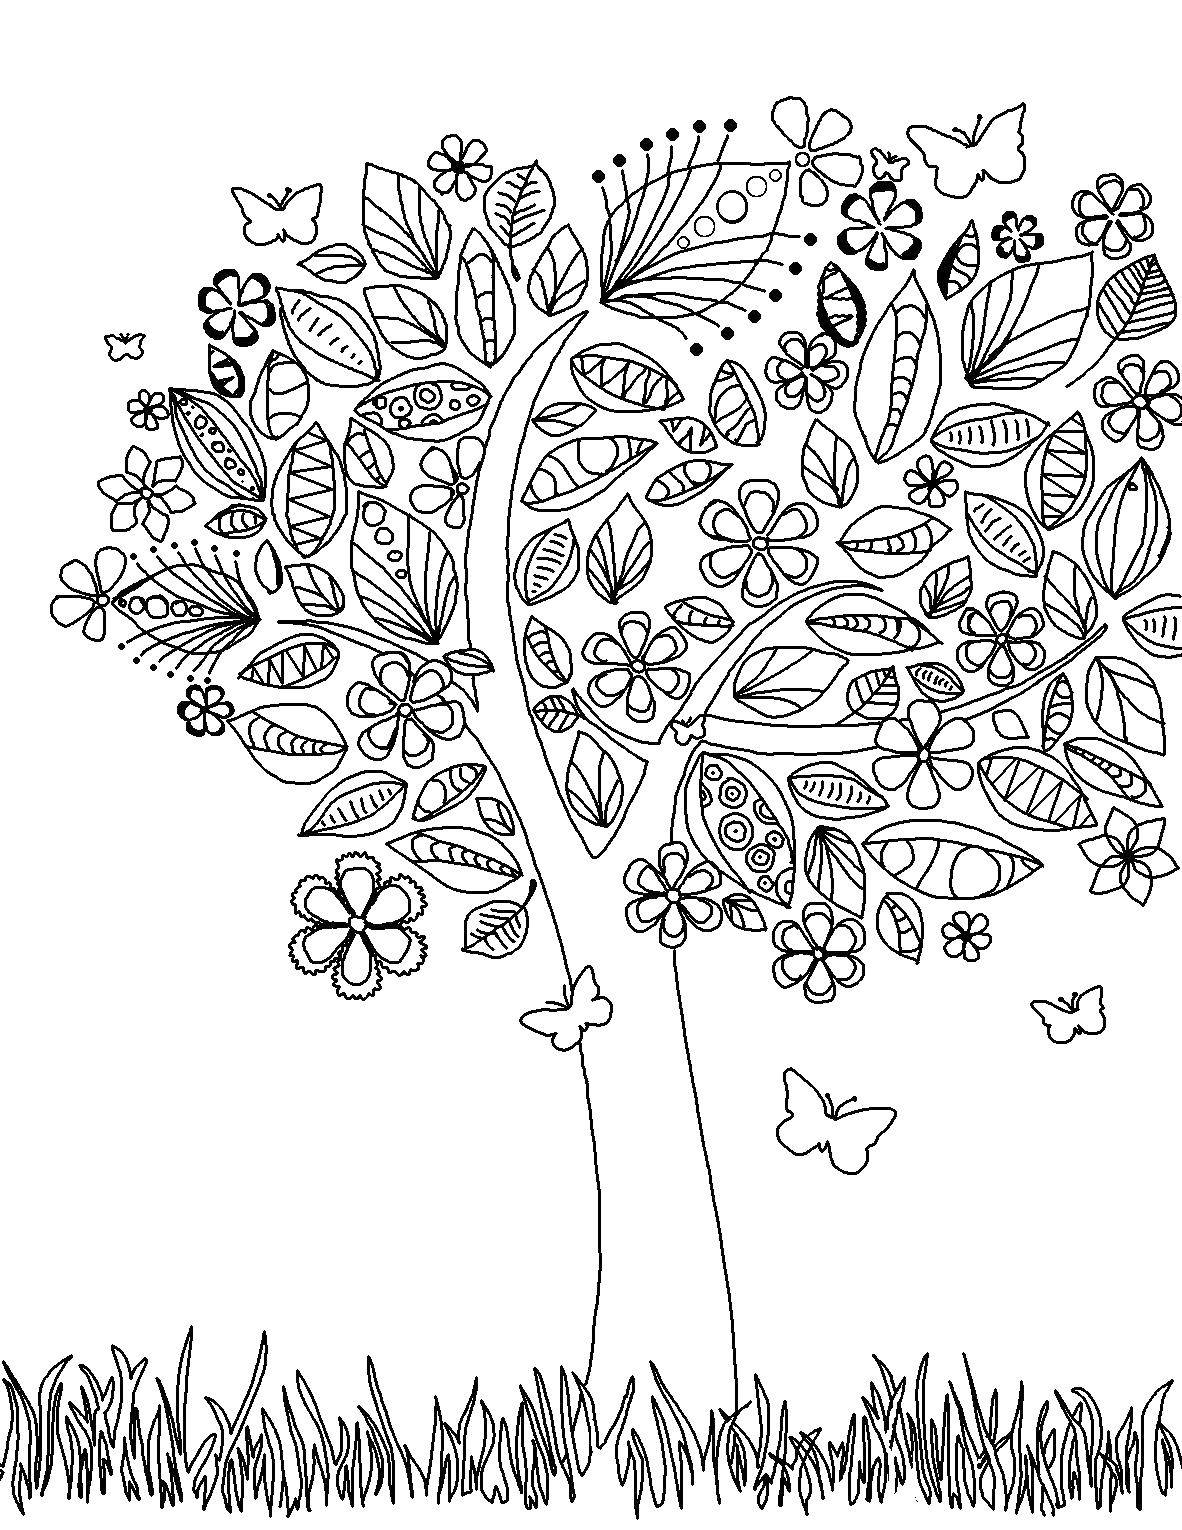 Coloring Anti-stress tree. Category coloring antistress. Tags:  Bathroom with shower.